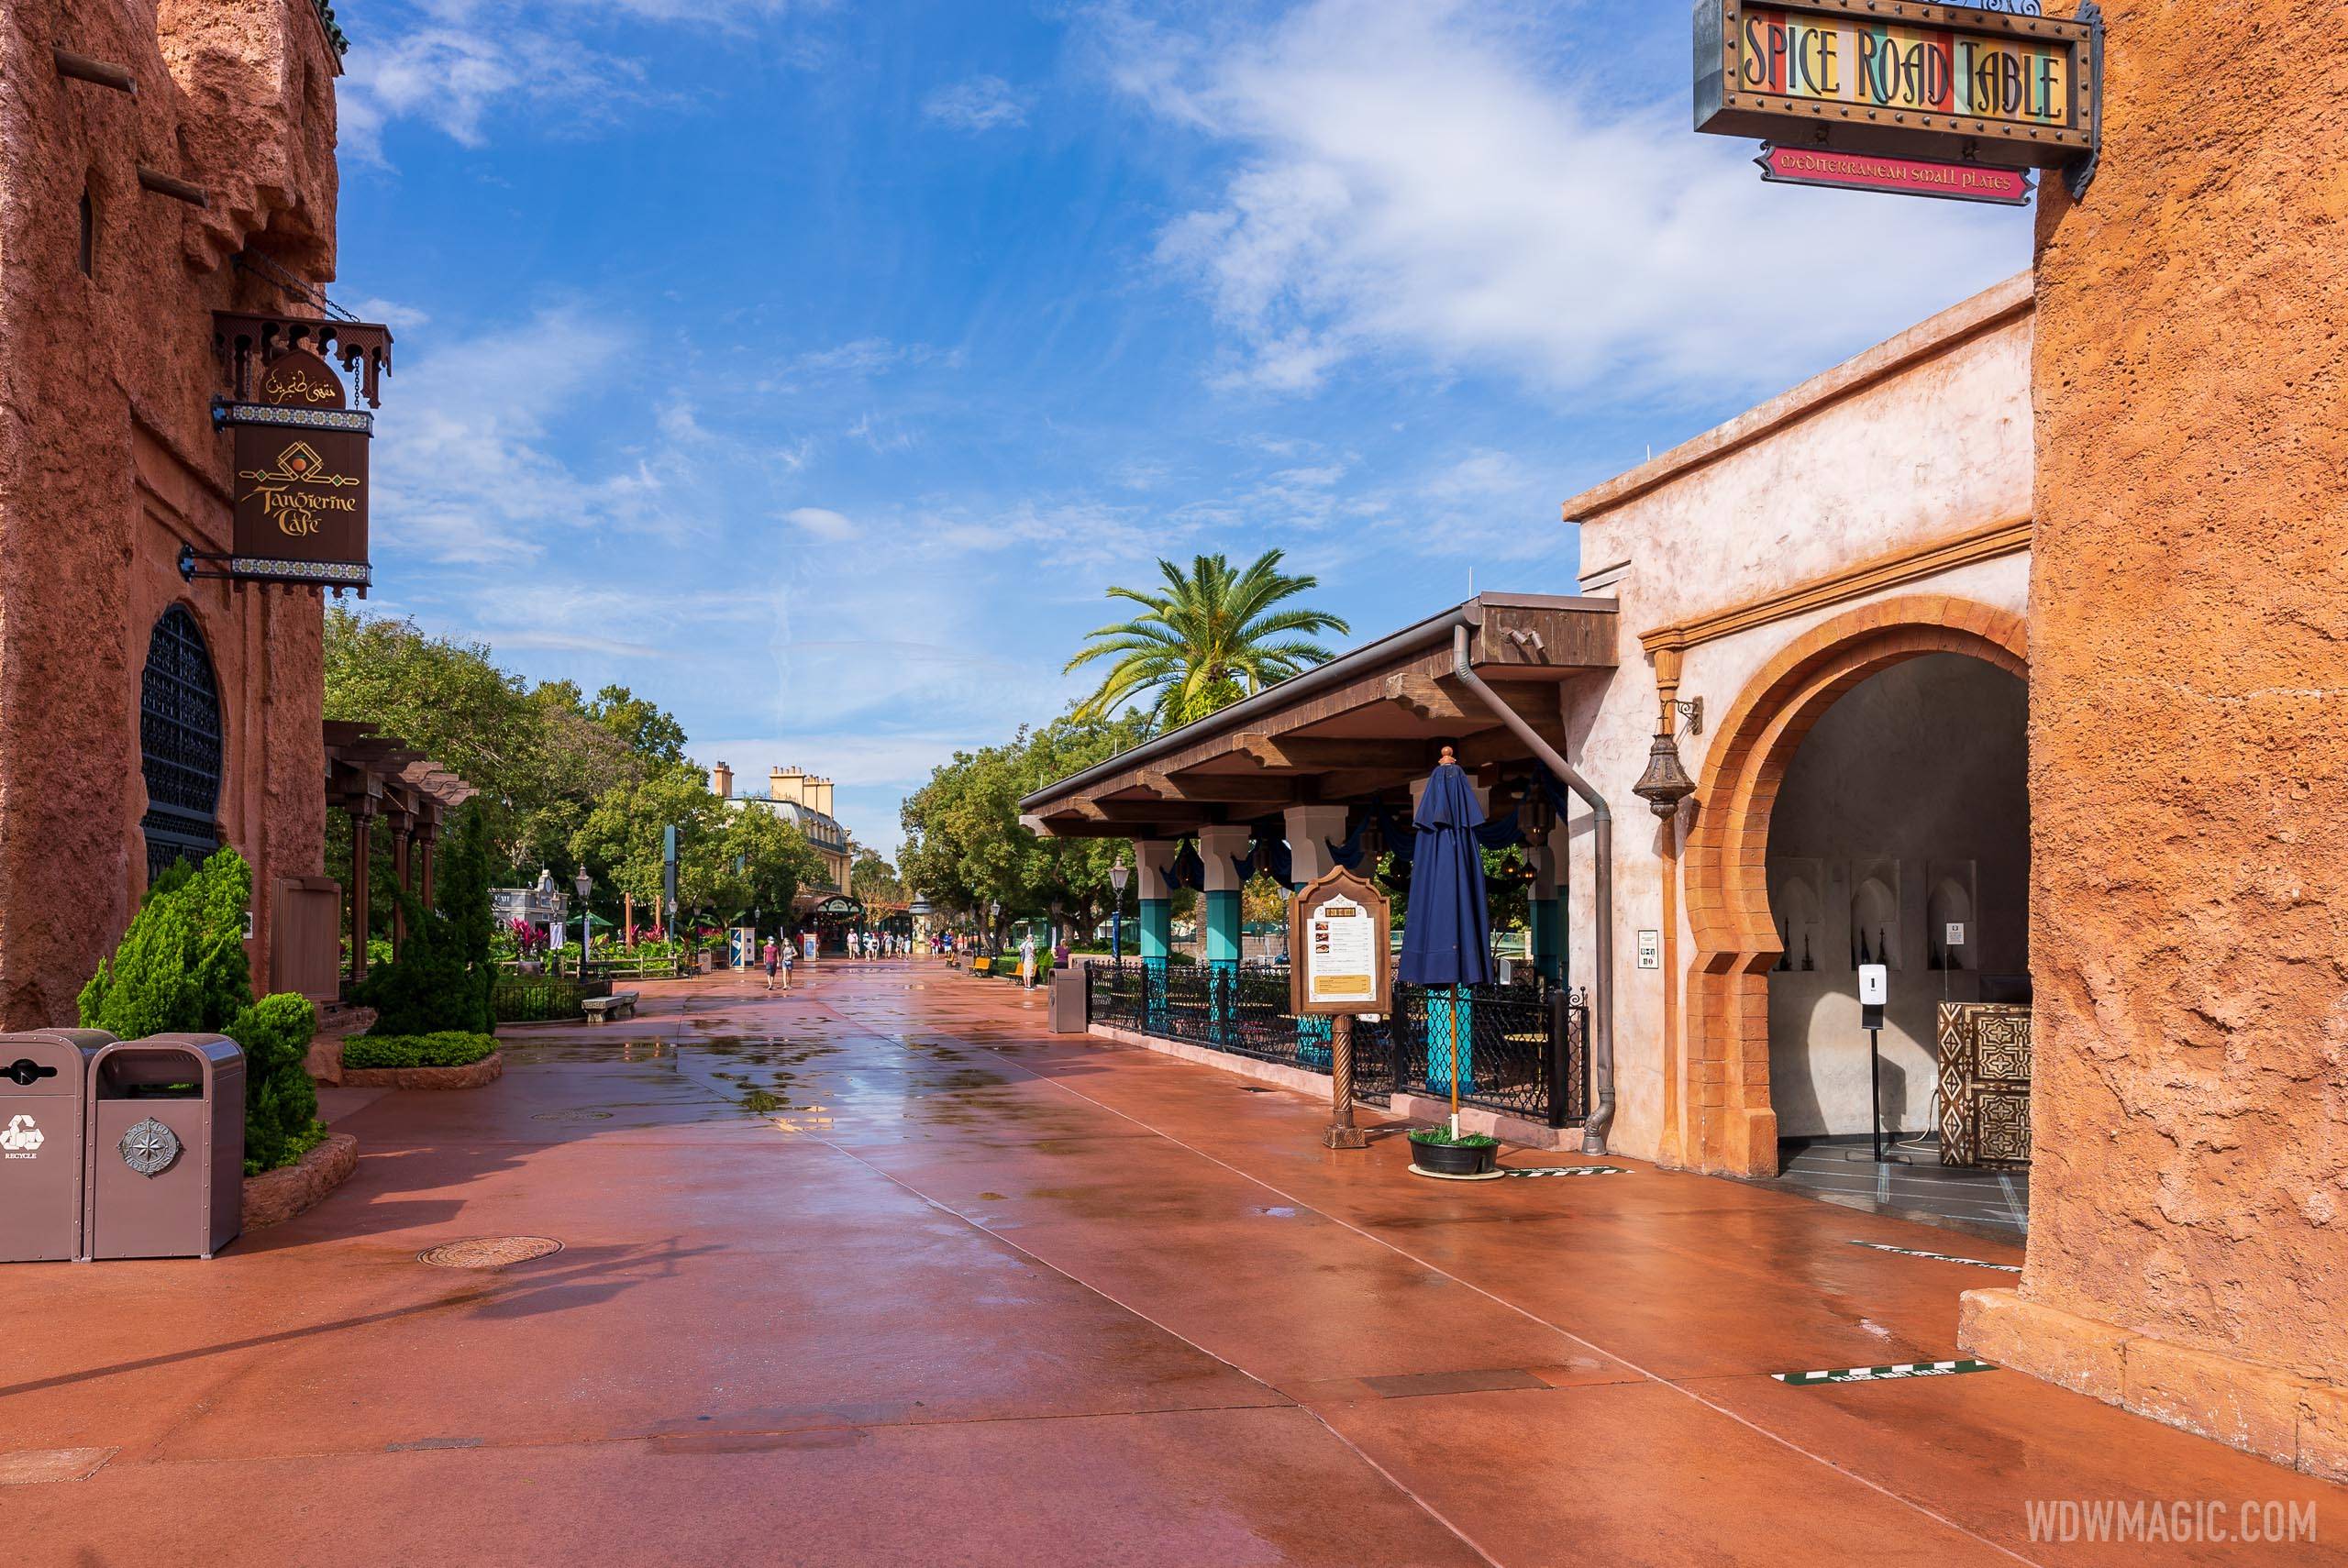 EPCOT's Spice Road Table halting reservations in early December